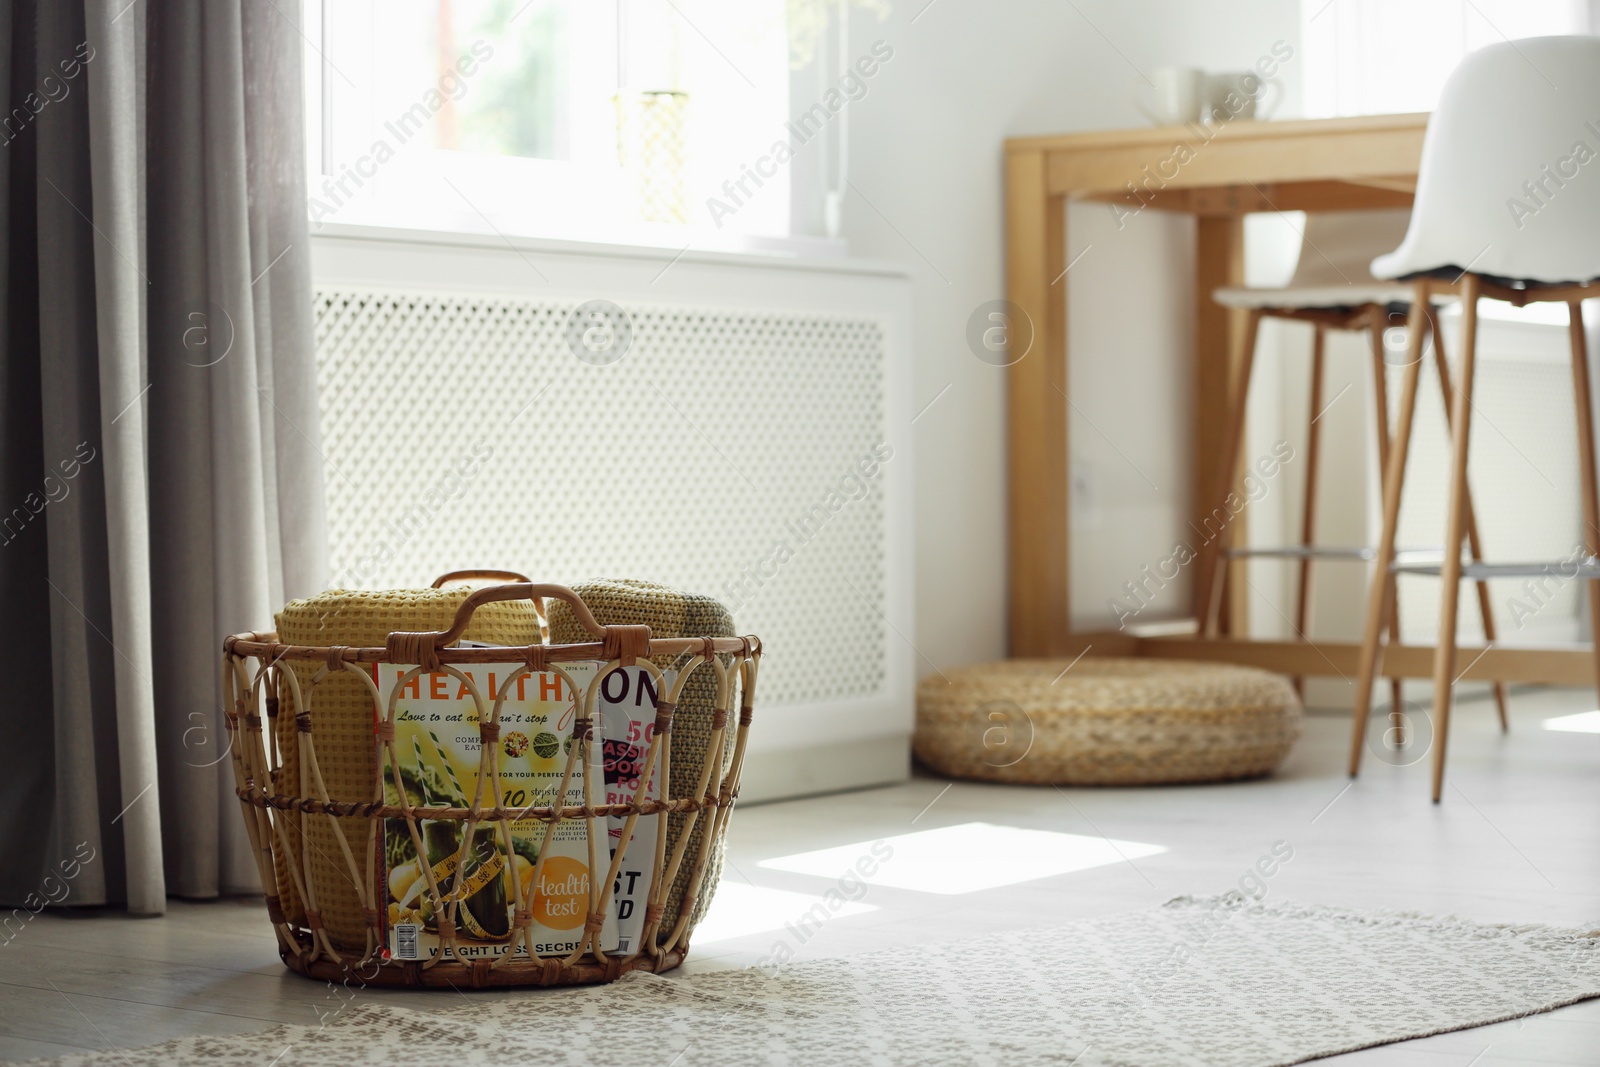 Photo of Basket with soft plaids in modern room interior